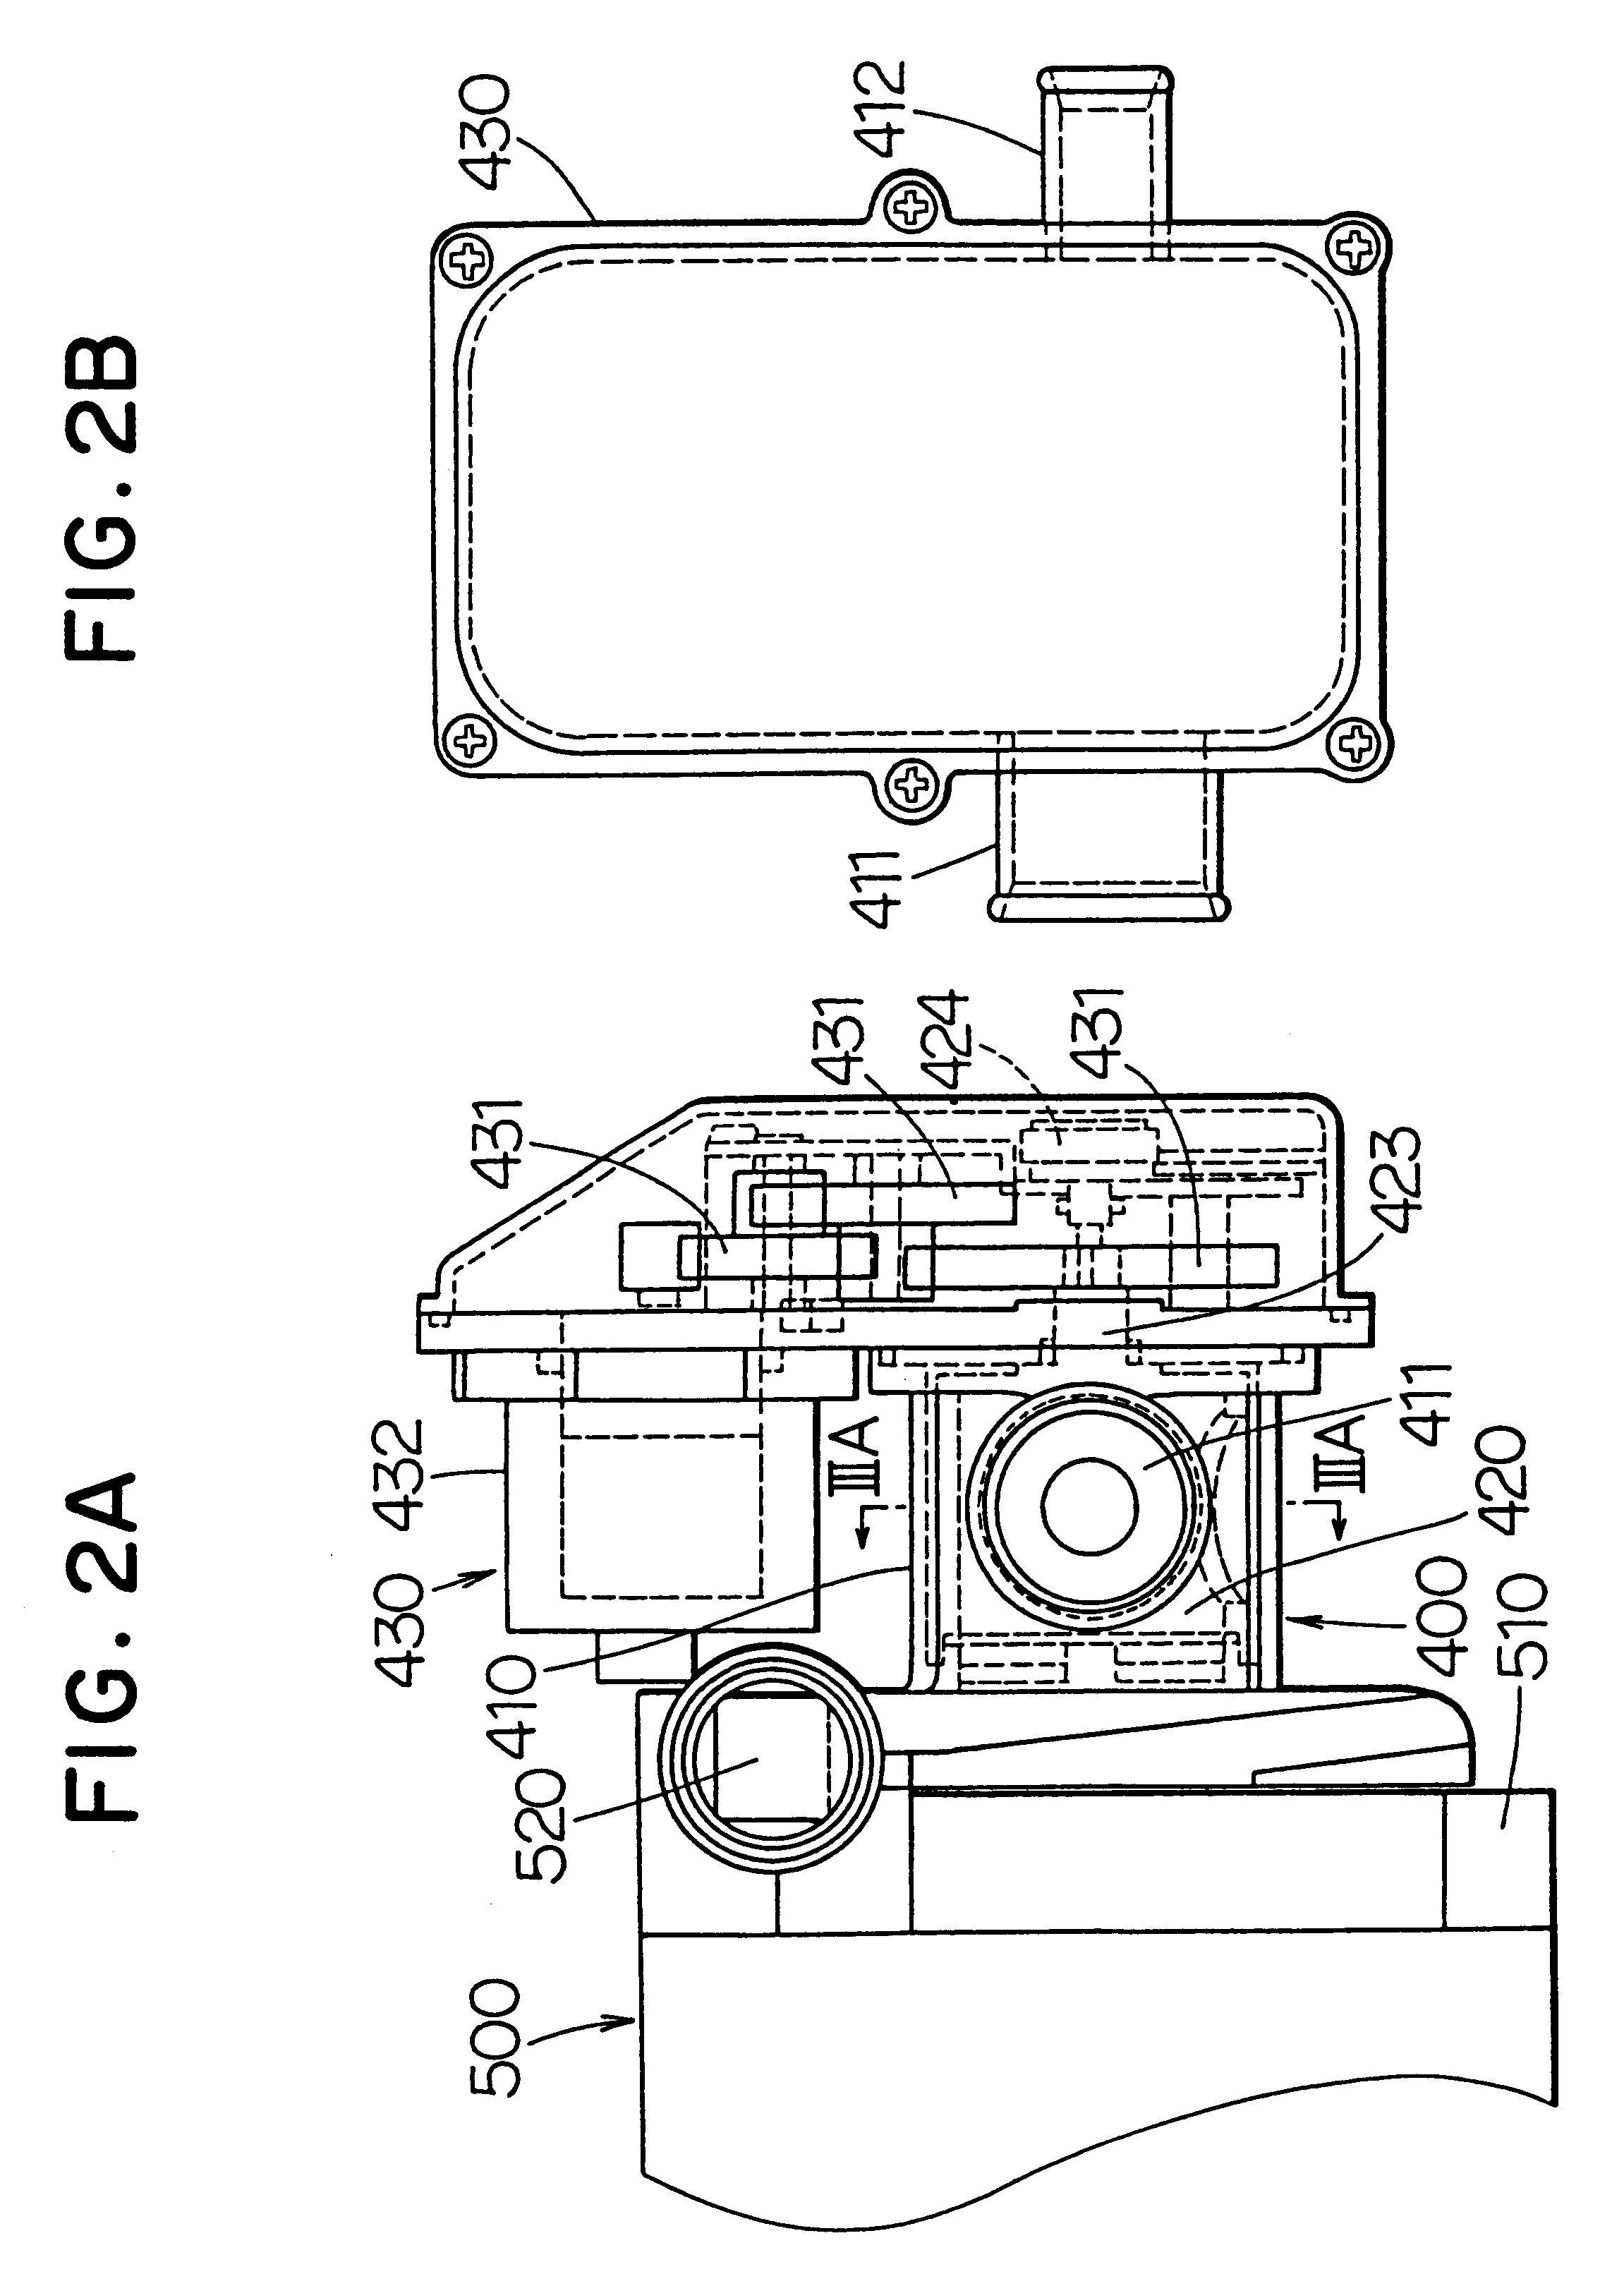 Cooling apparatus for liquid-cooled internal combustion engine